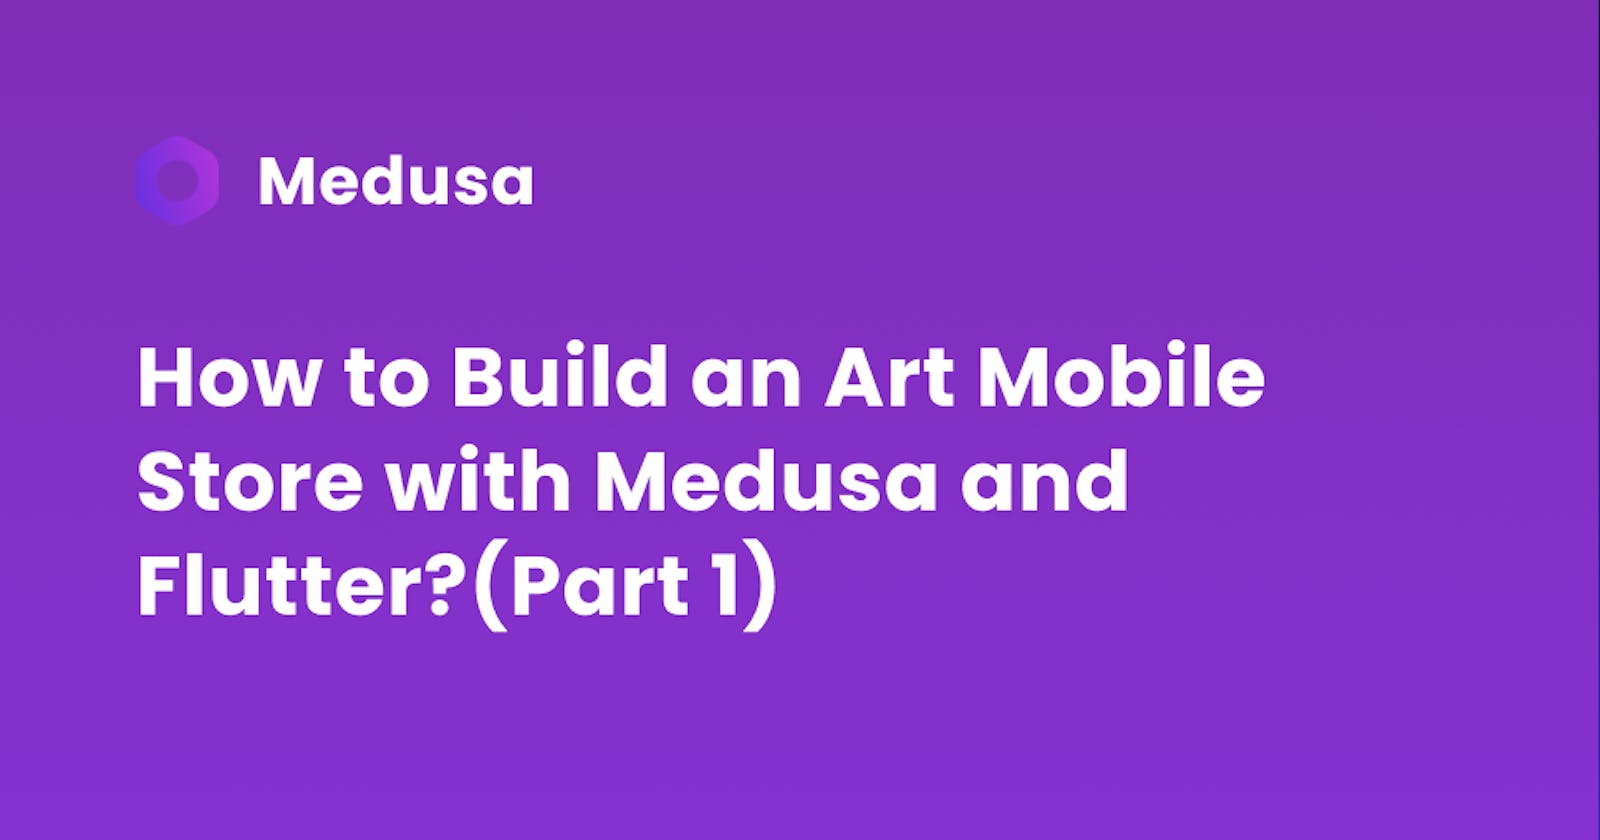 How to Build an Art Mobile Store with Medusa and Flutter?